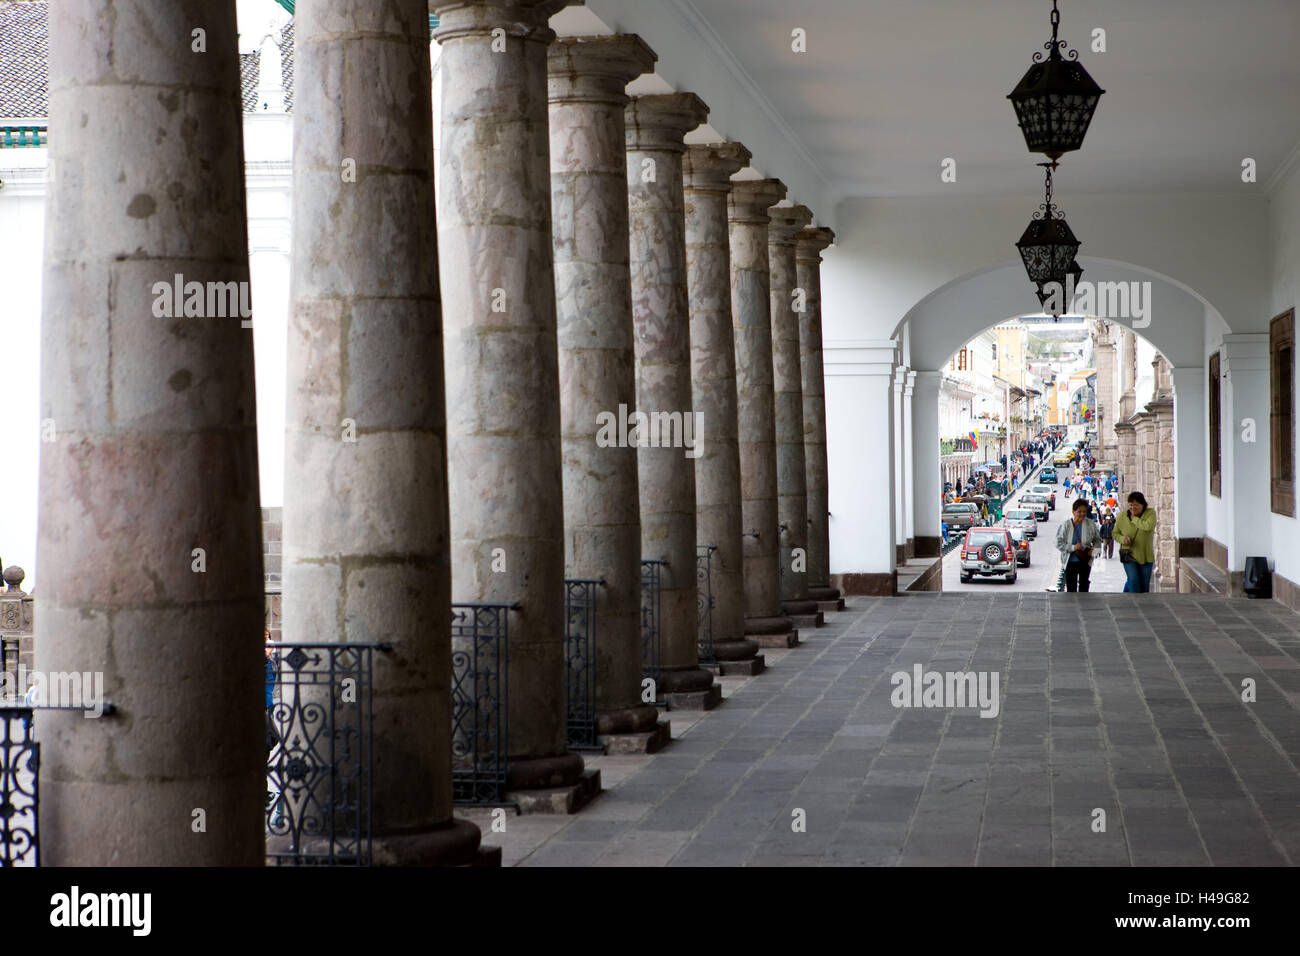 Ecuador, province Pichincha, Quito, presidential palace, detail, colonnade, passer-by, South America, town, capital, architecture, building, structure, outside, pillars, passage, street, person, pedestrian, passer-by, place of interest, Stock Photo